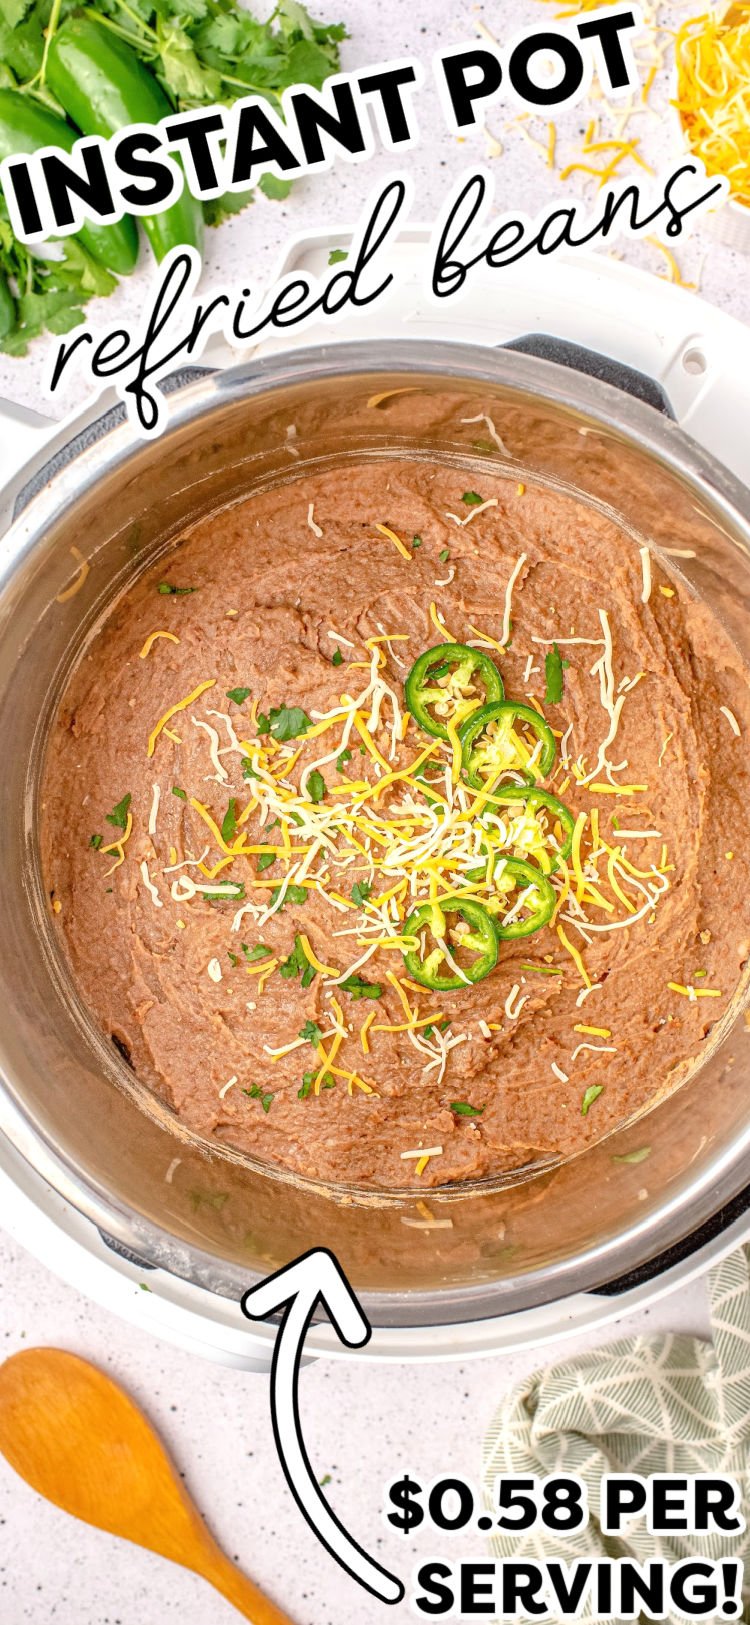 These Instant Pot Refried Beans are creamy, delicious, and take minimum time and effort to prepare compared to stovetop or crockpot recipes! via @foodfolksandfun